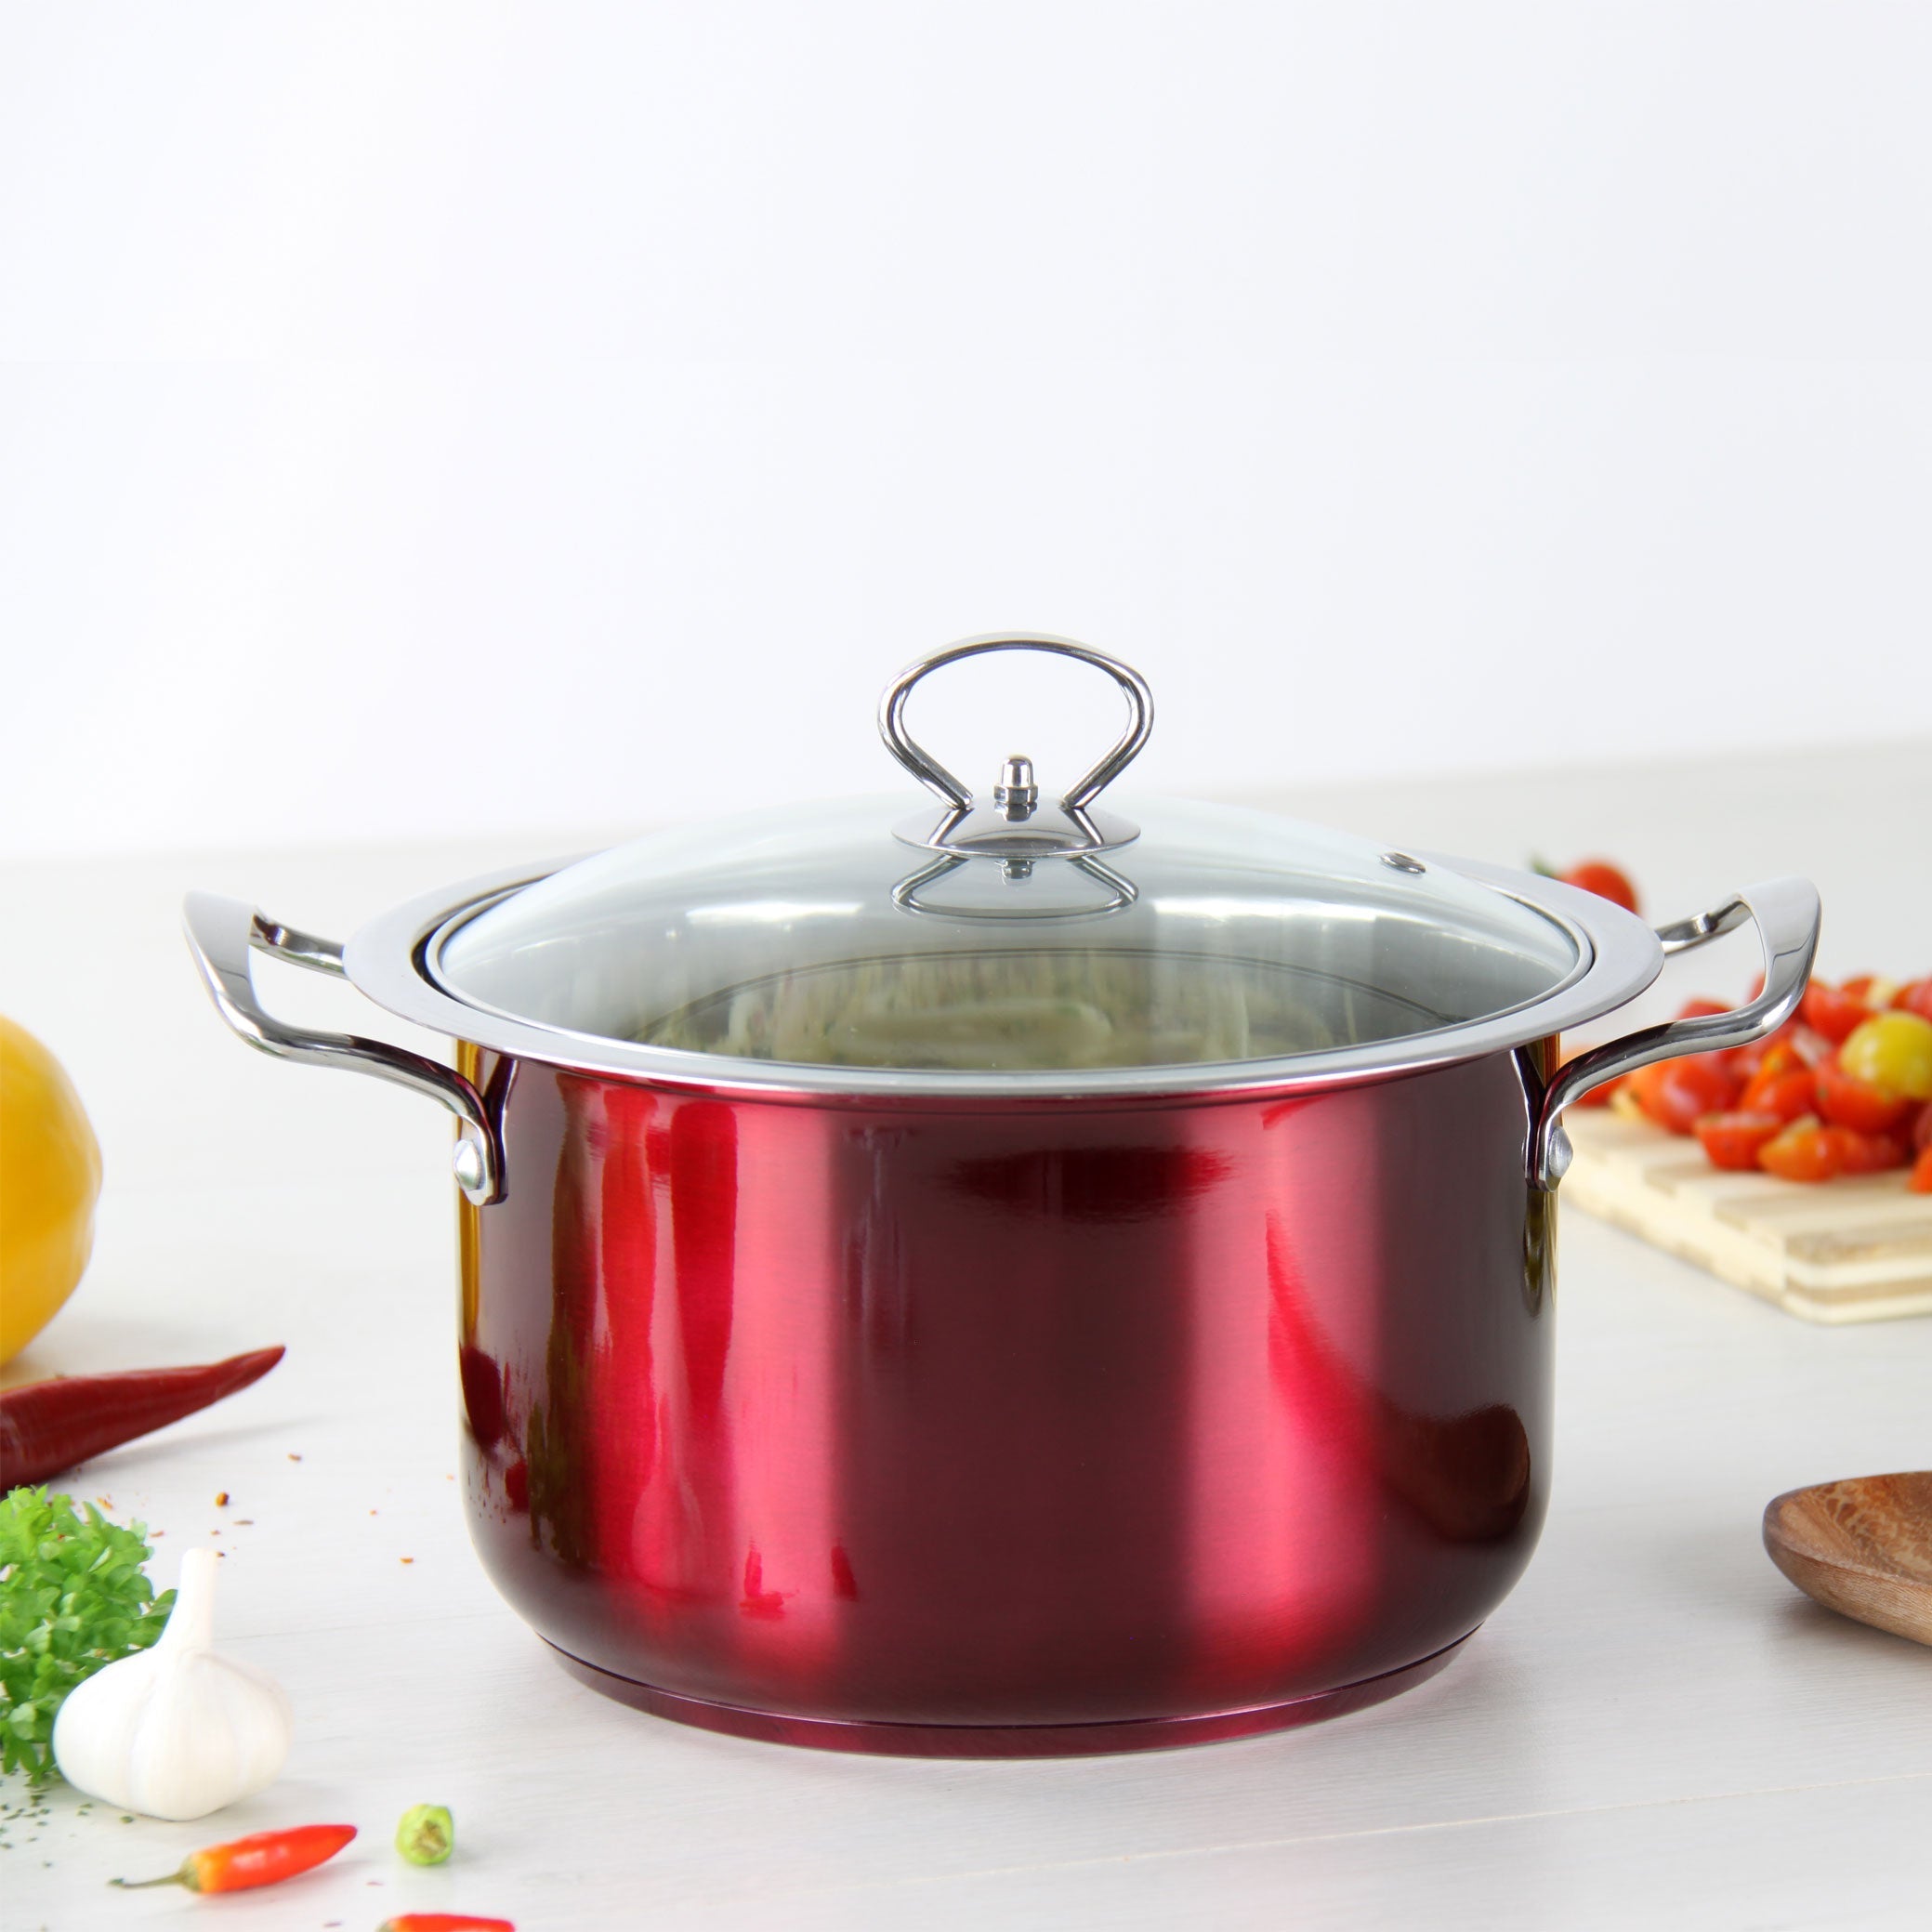 Stainless Steel Stockpot - Induction Base - RUBY -22cm